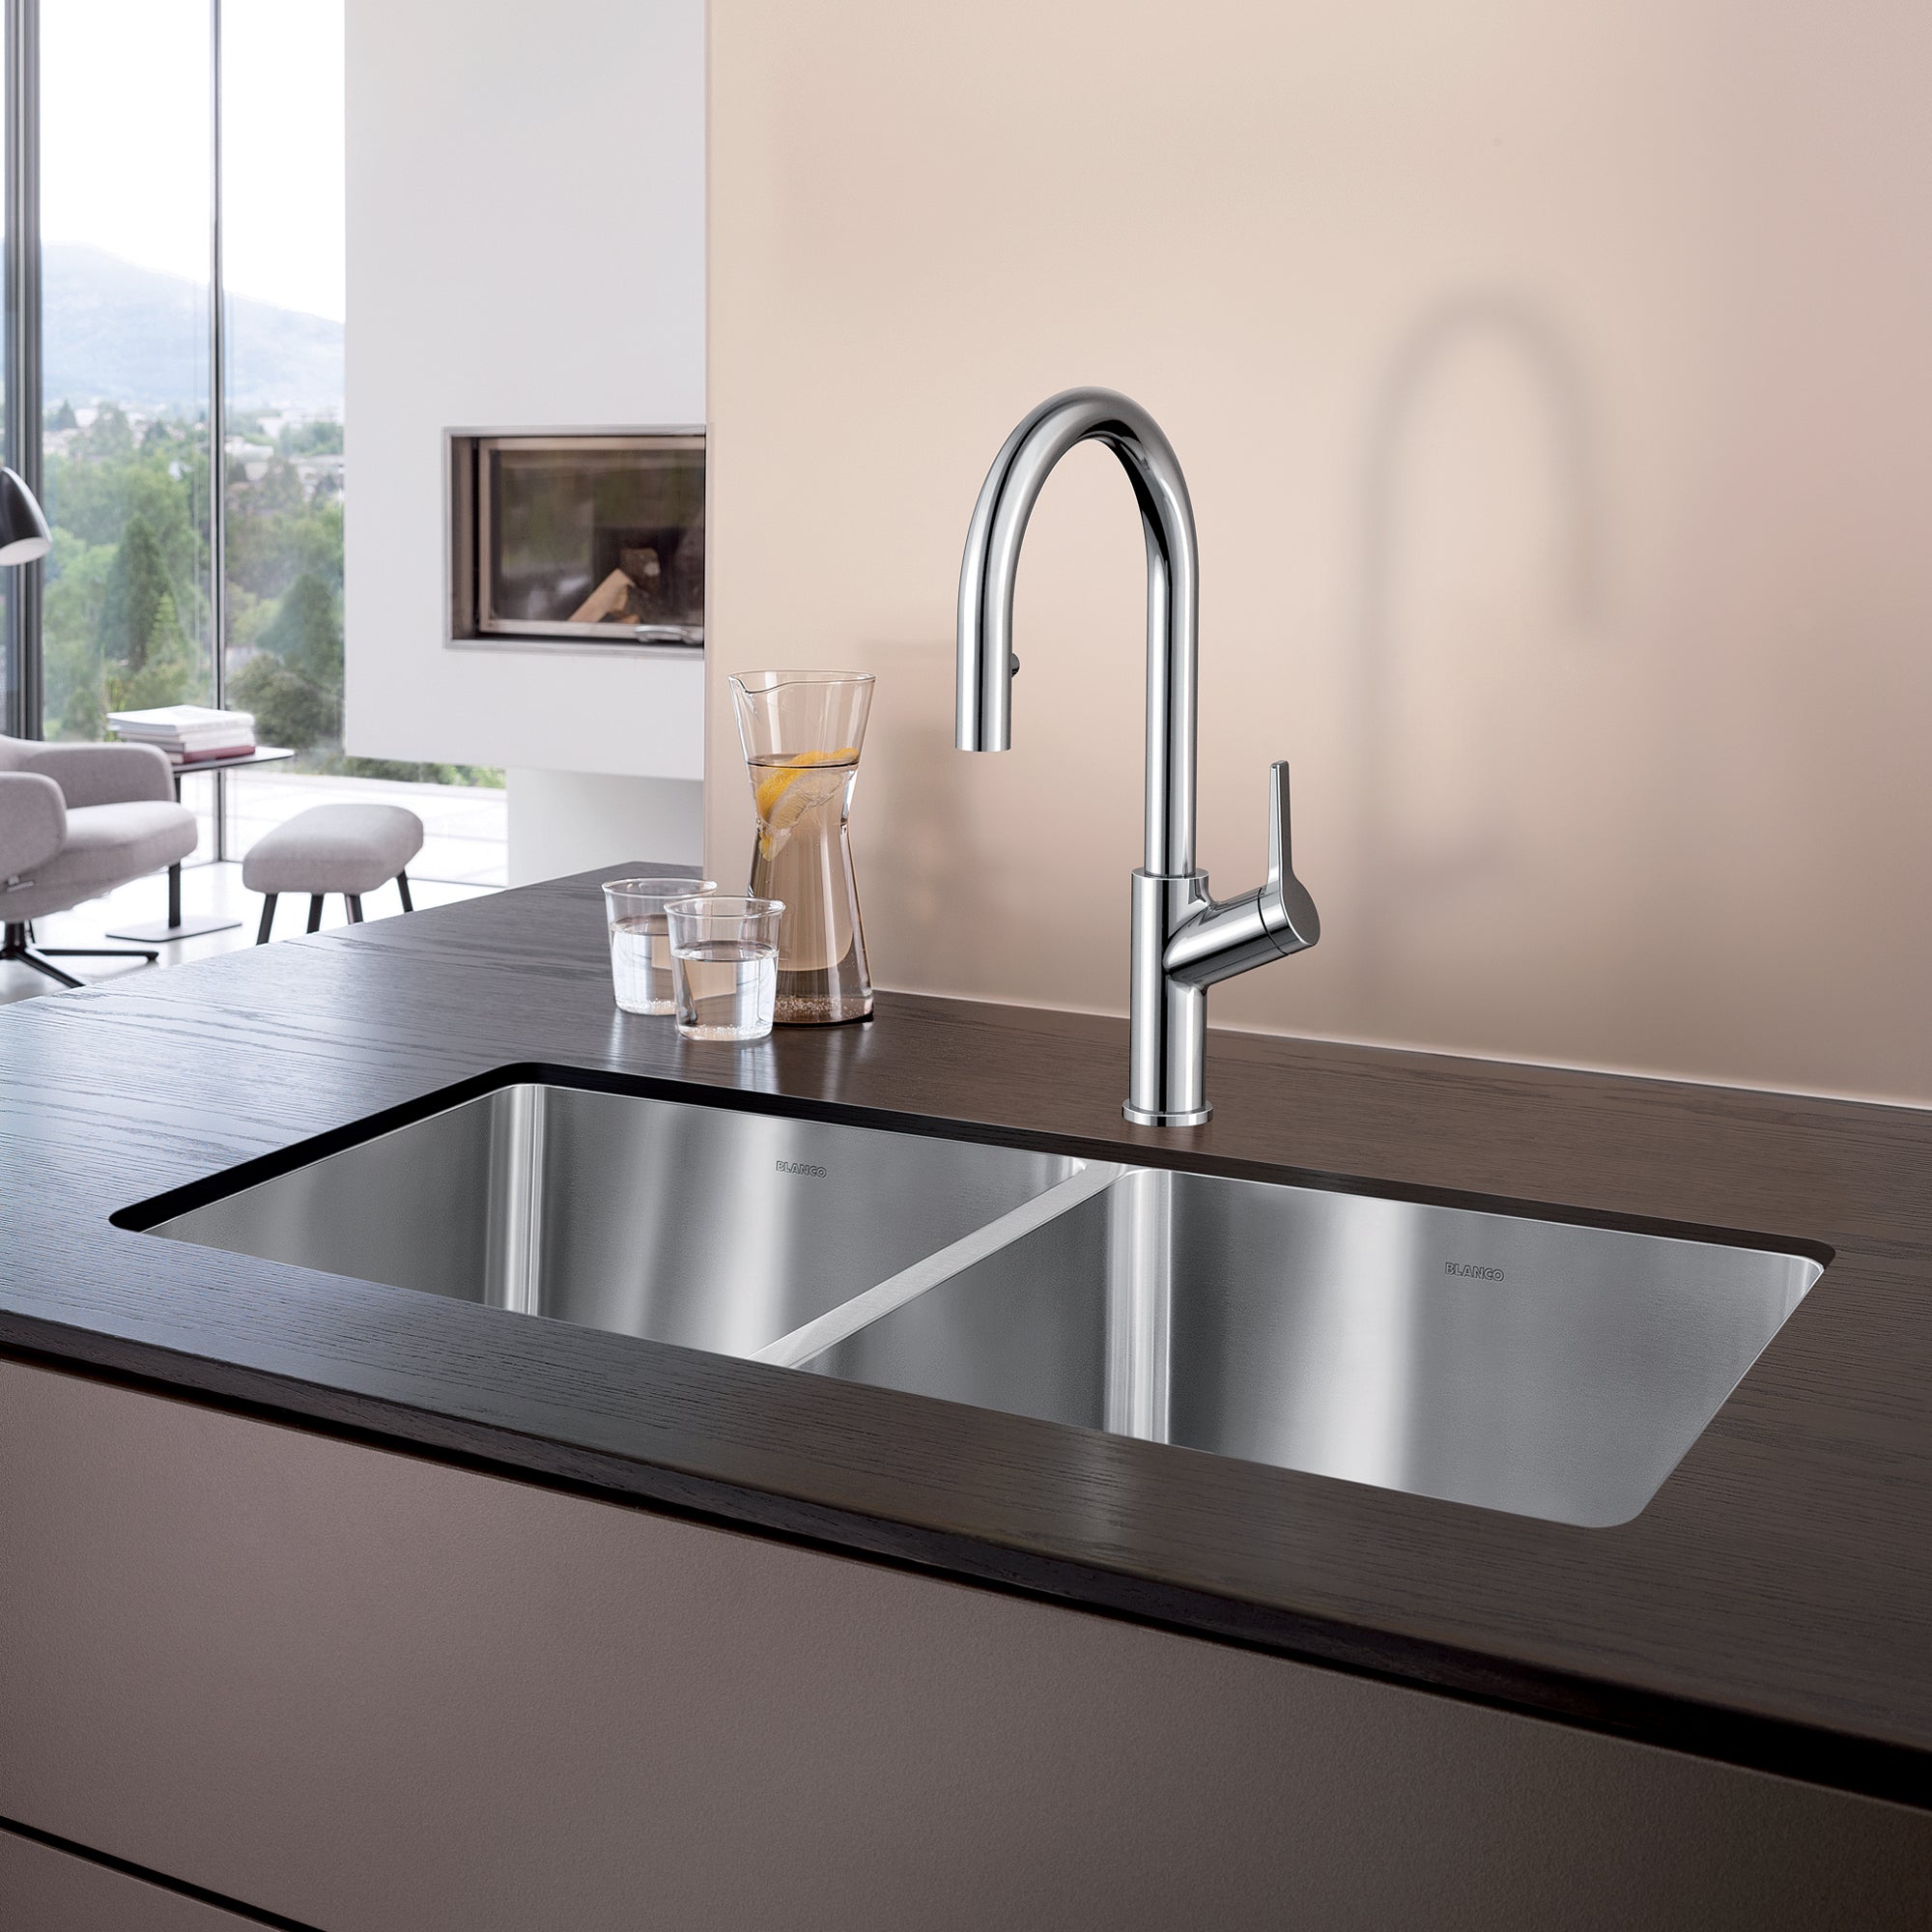 Blanco 401334- ANDANO U 2 Double Bowl Undermount Sink, Stainless Steel - FaucetExpress.ca